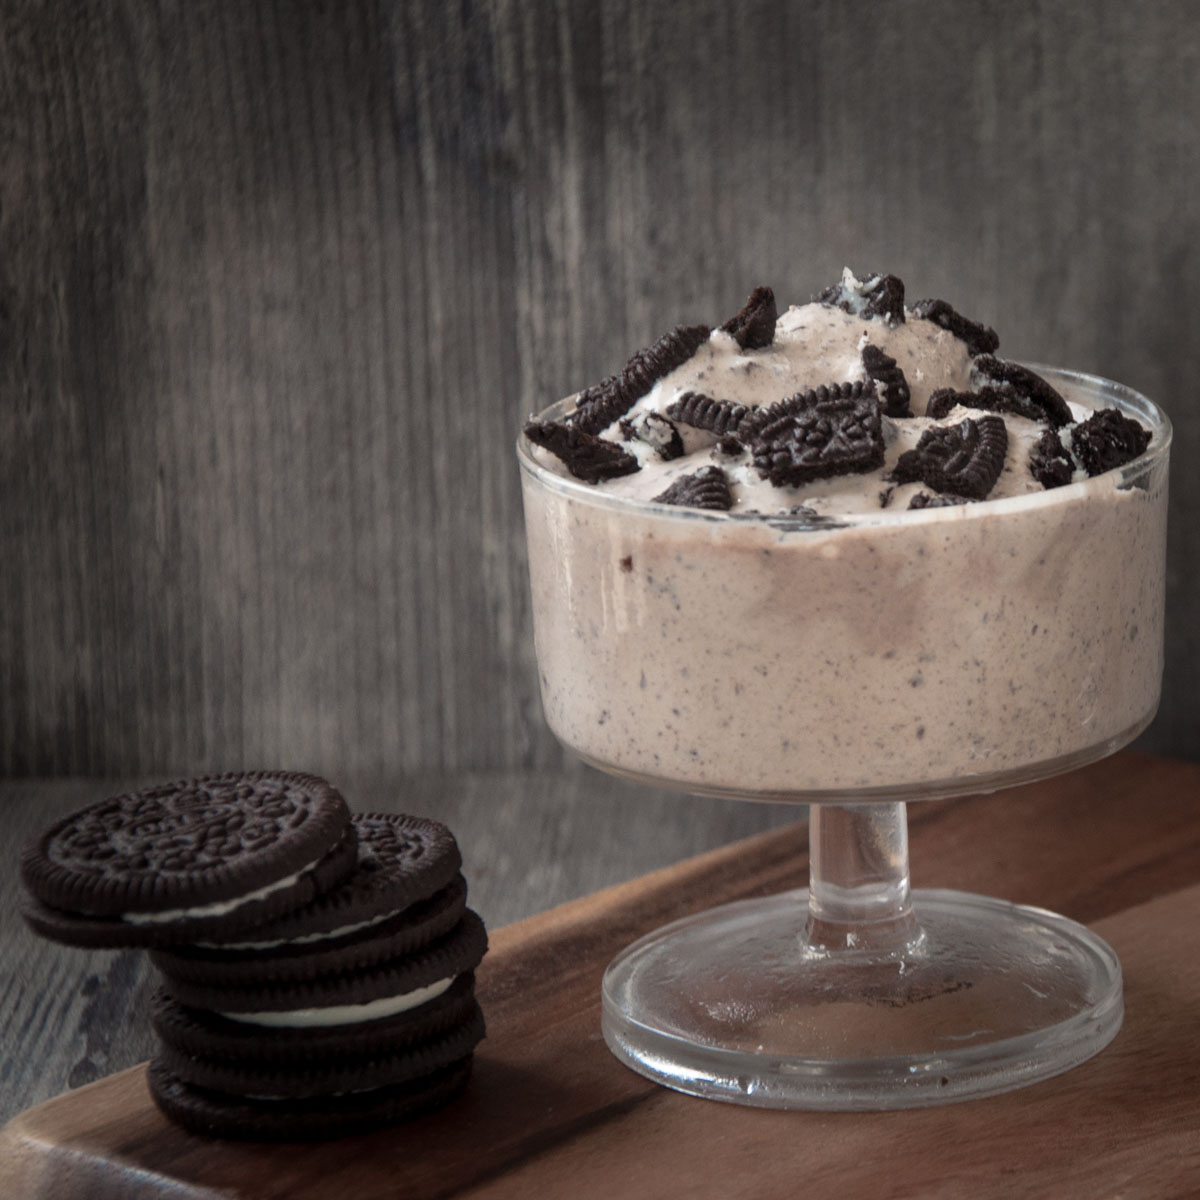 Oreo ice cream served in a glass cup with oreo cookies stacked in foreground.